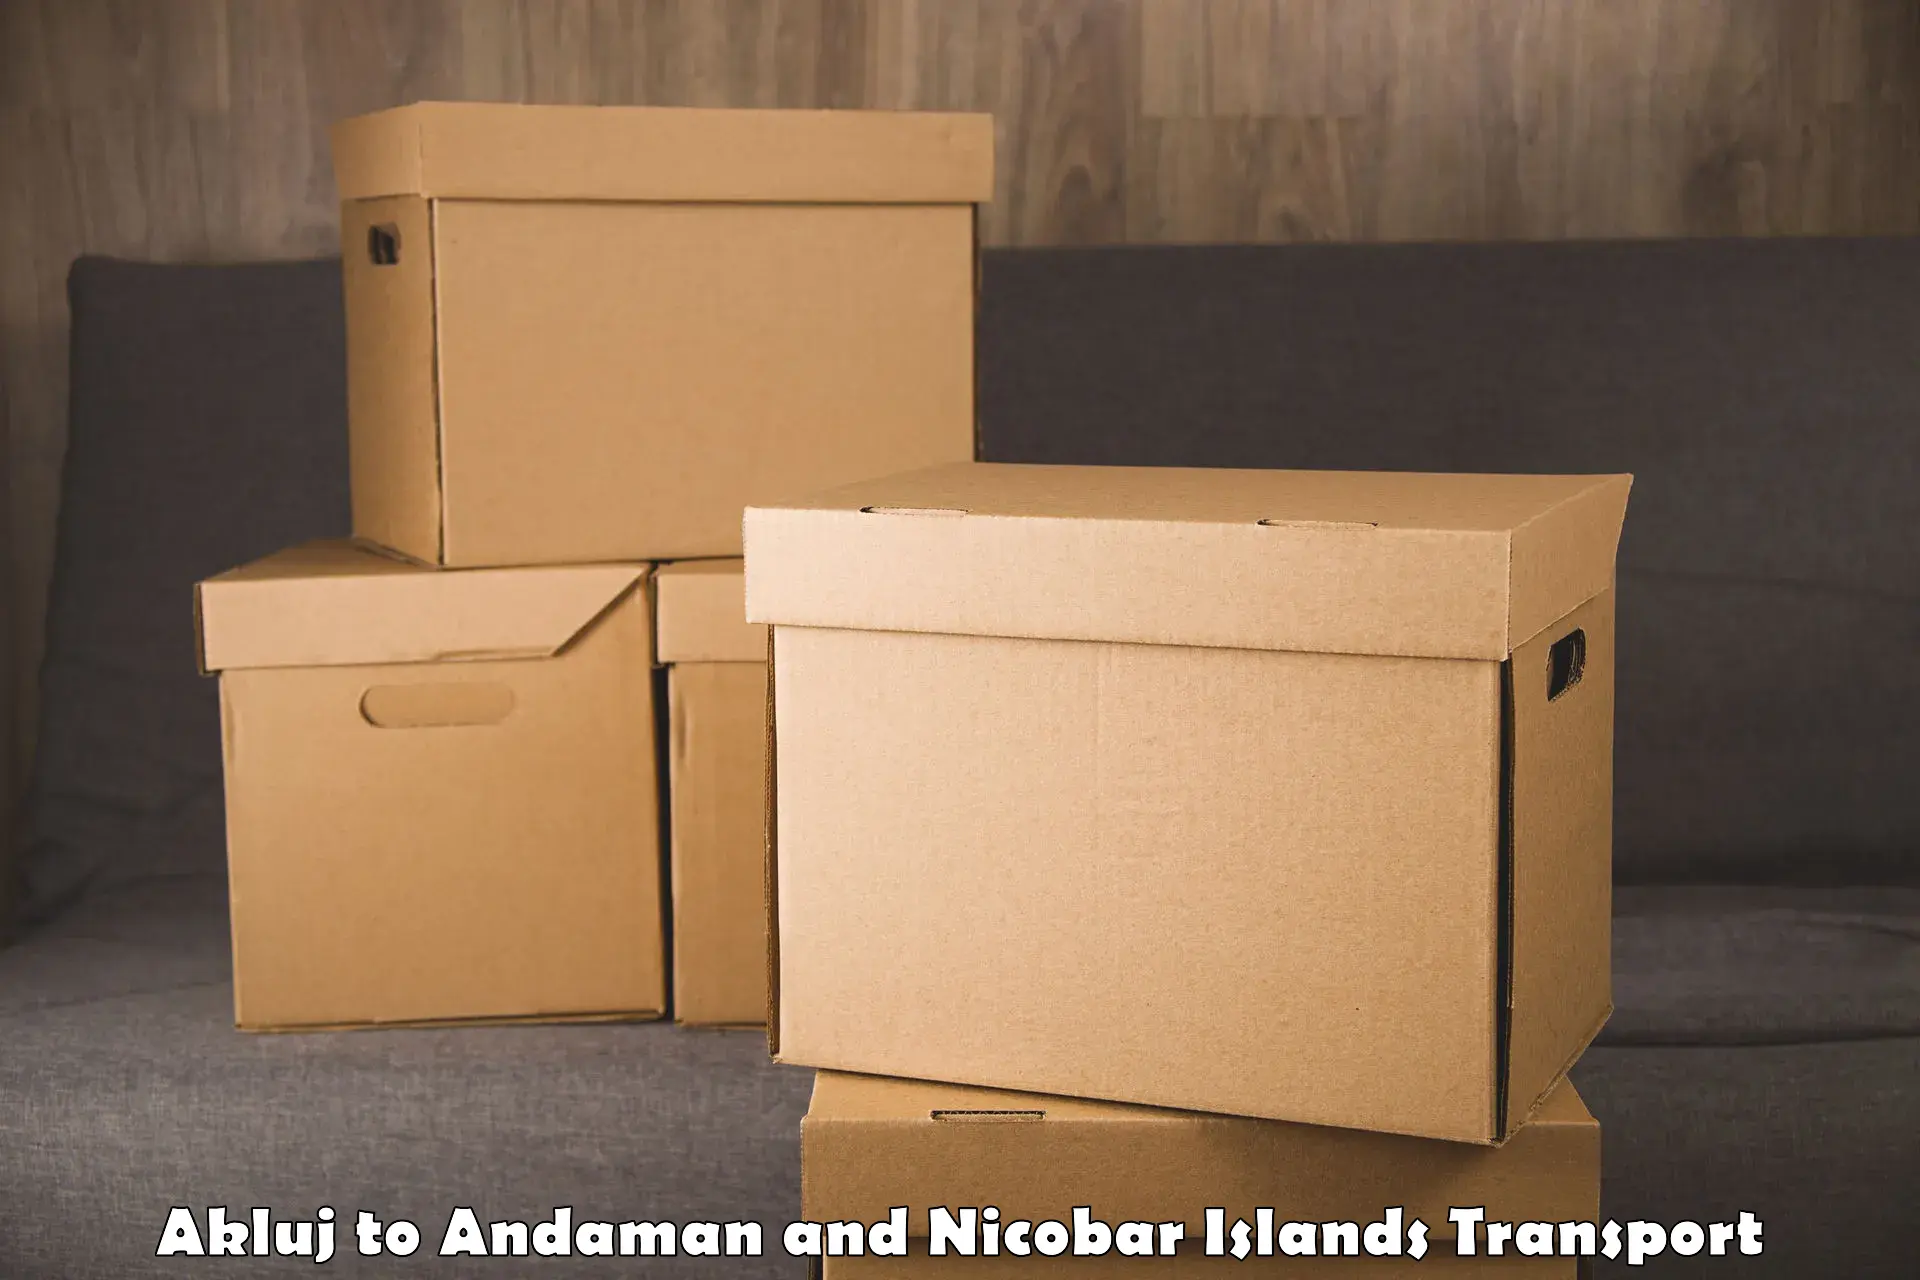 Online transport service Akluj to Andaman and Nicobar Islands